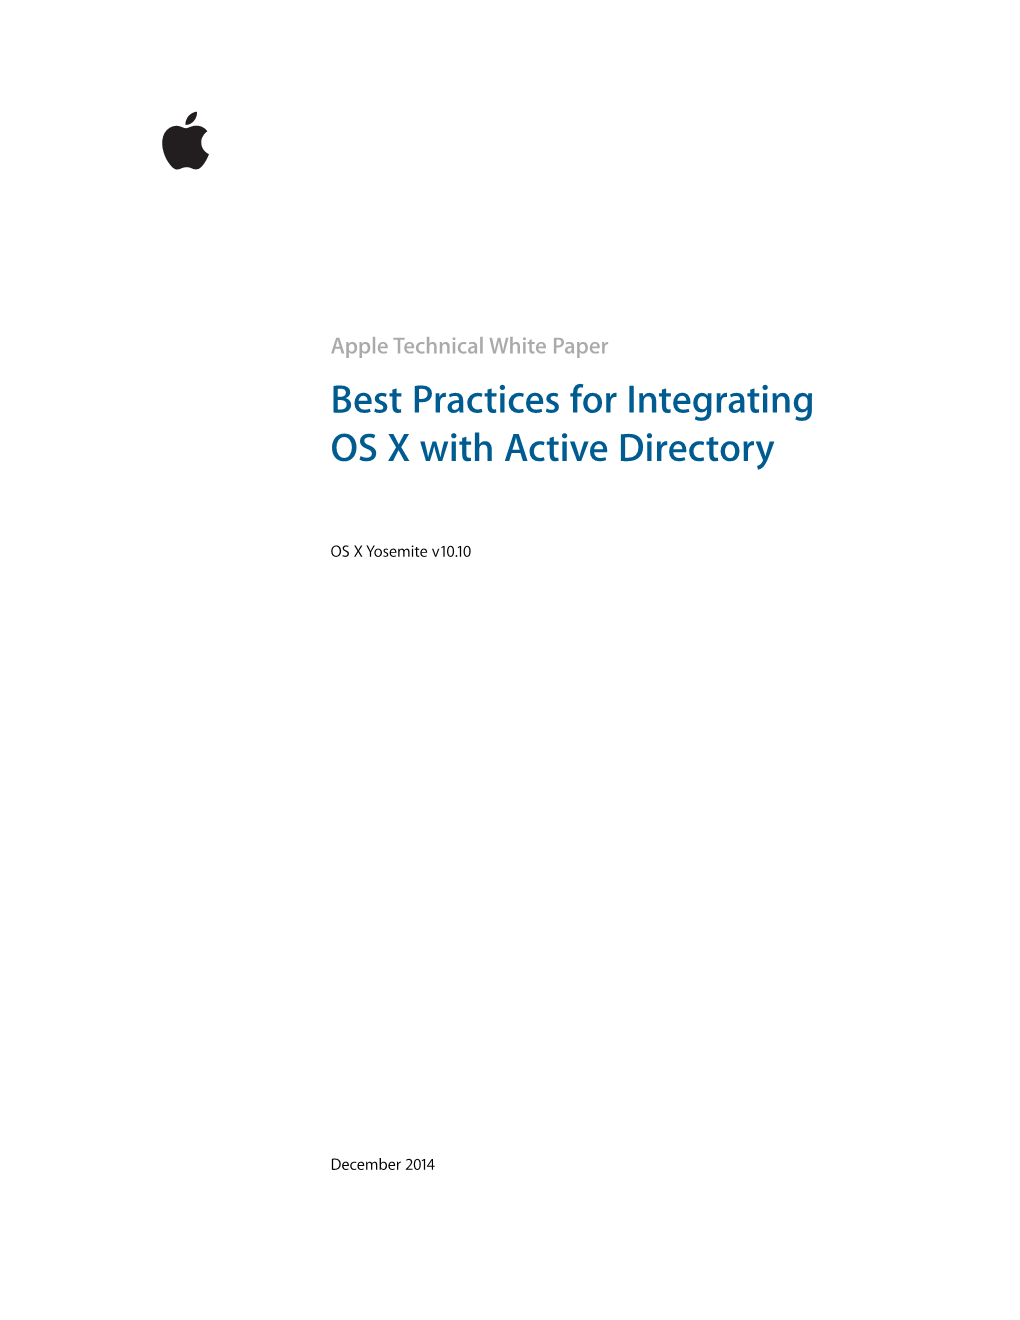 Best Practices for Integrating OS X with Active Directory